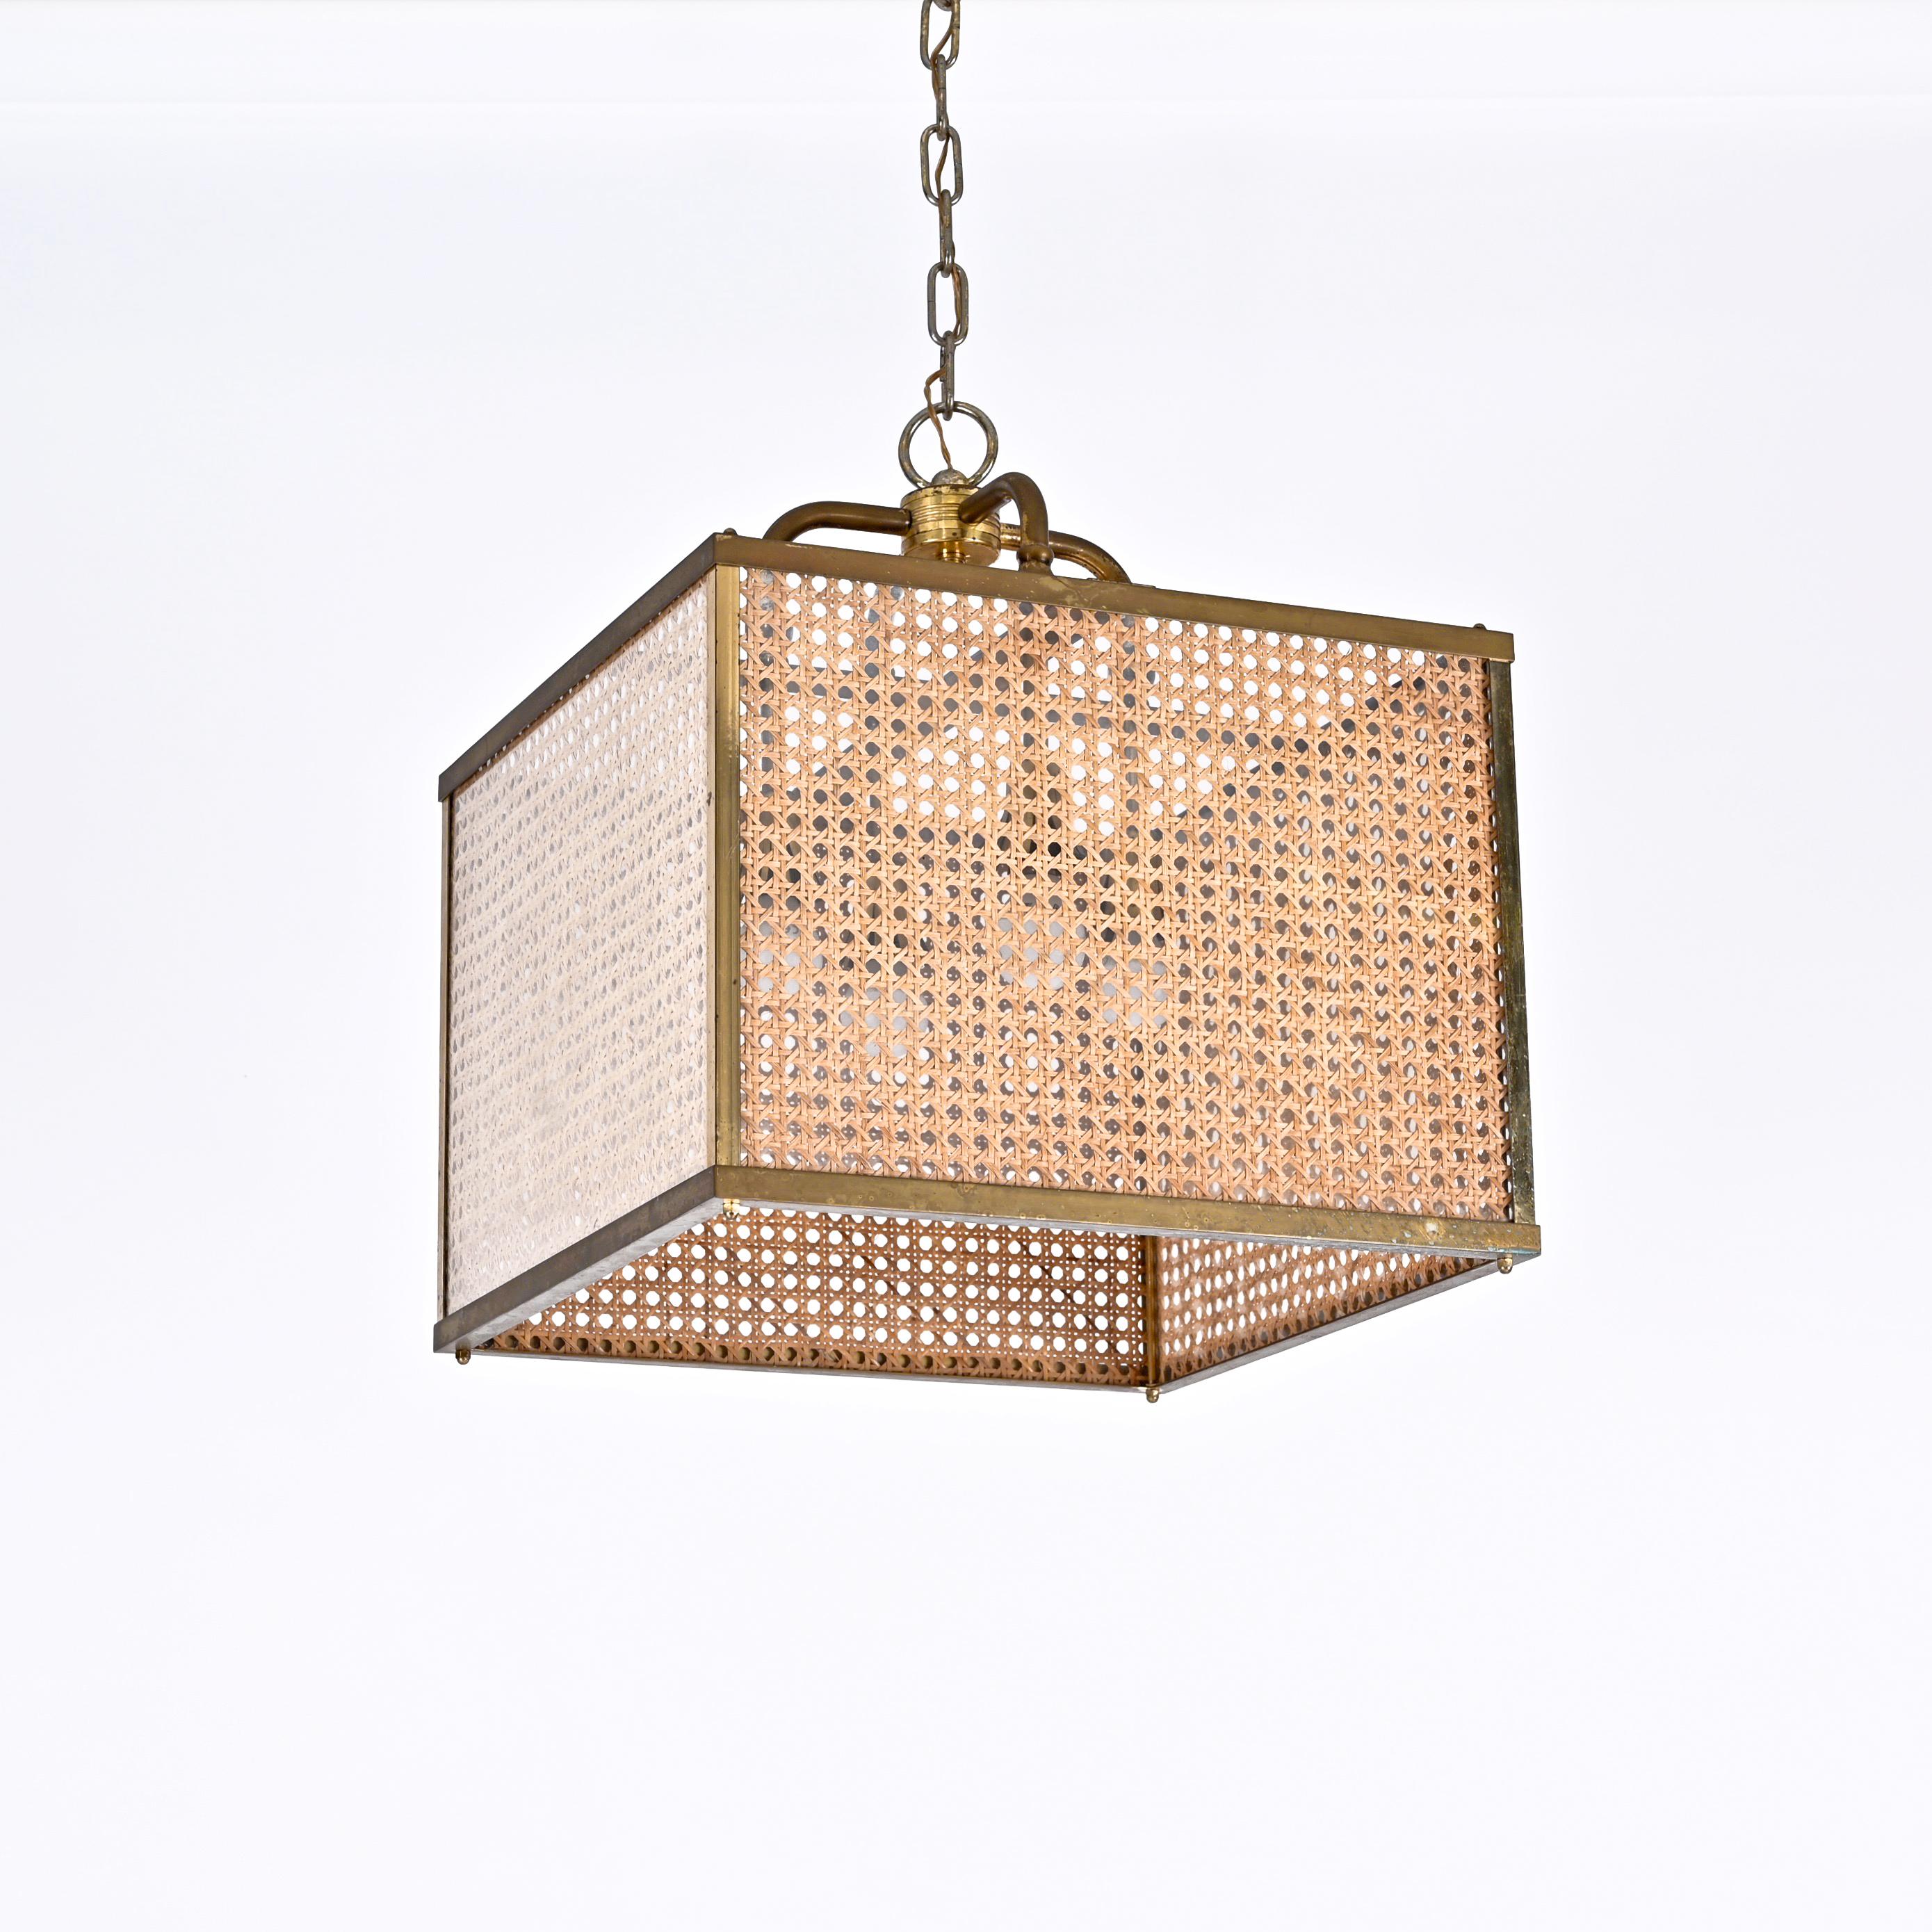 Marvellous chandelier made is solid brass, glass and Vienna straw wicker. This rare light was realized in Italy in the 1950s. 

This stunning chandelier features a lovely square shade in solid brass that is enriched by Vienna straw wicker. The